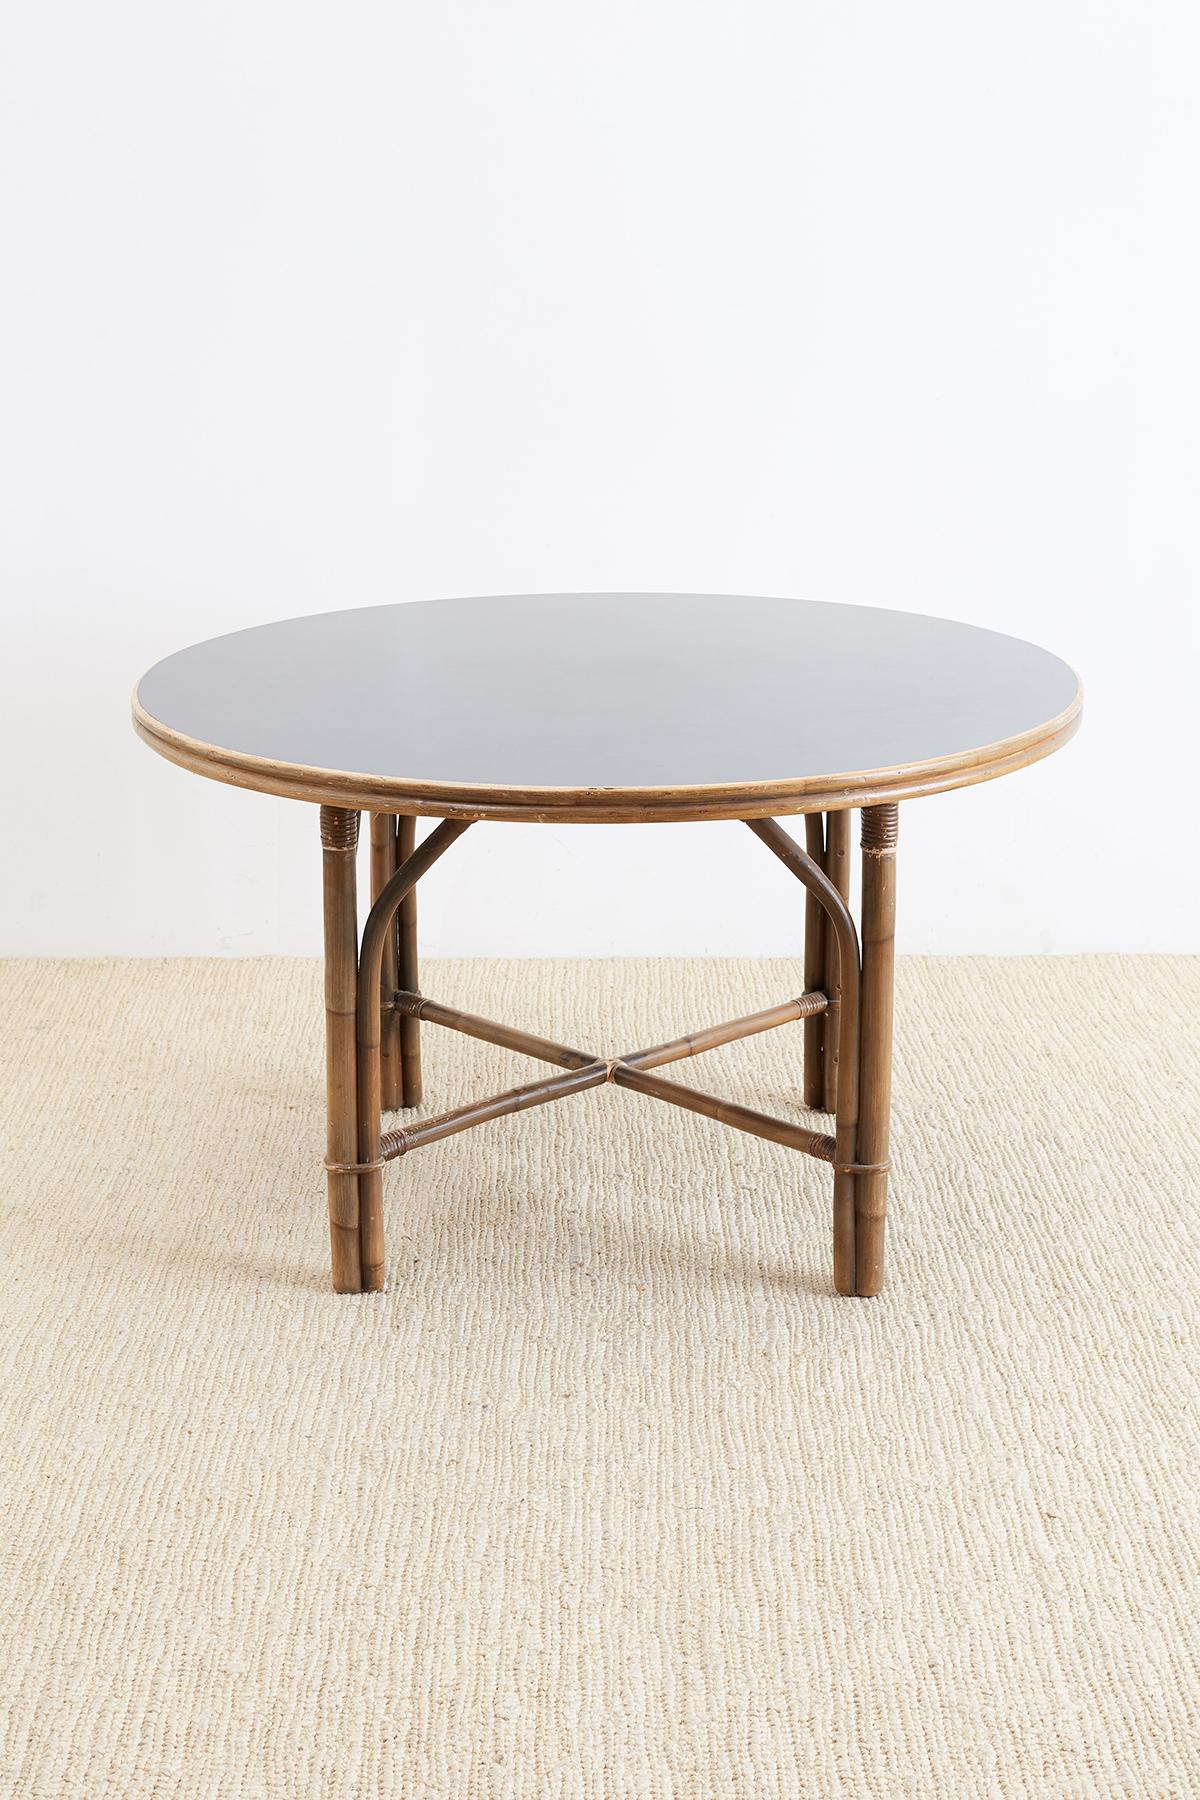 Mid-Century Modern period rattan and formica dining table or patio table by Ficks Reed. Features a large round formica black top with a double bamboo edge. The table is supported by round bamboo legs conjoined with stretchers and reinforced with